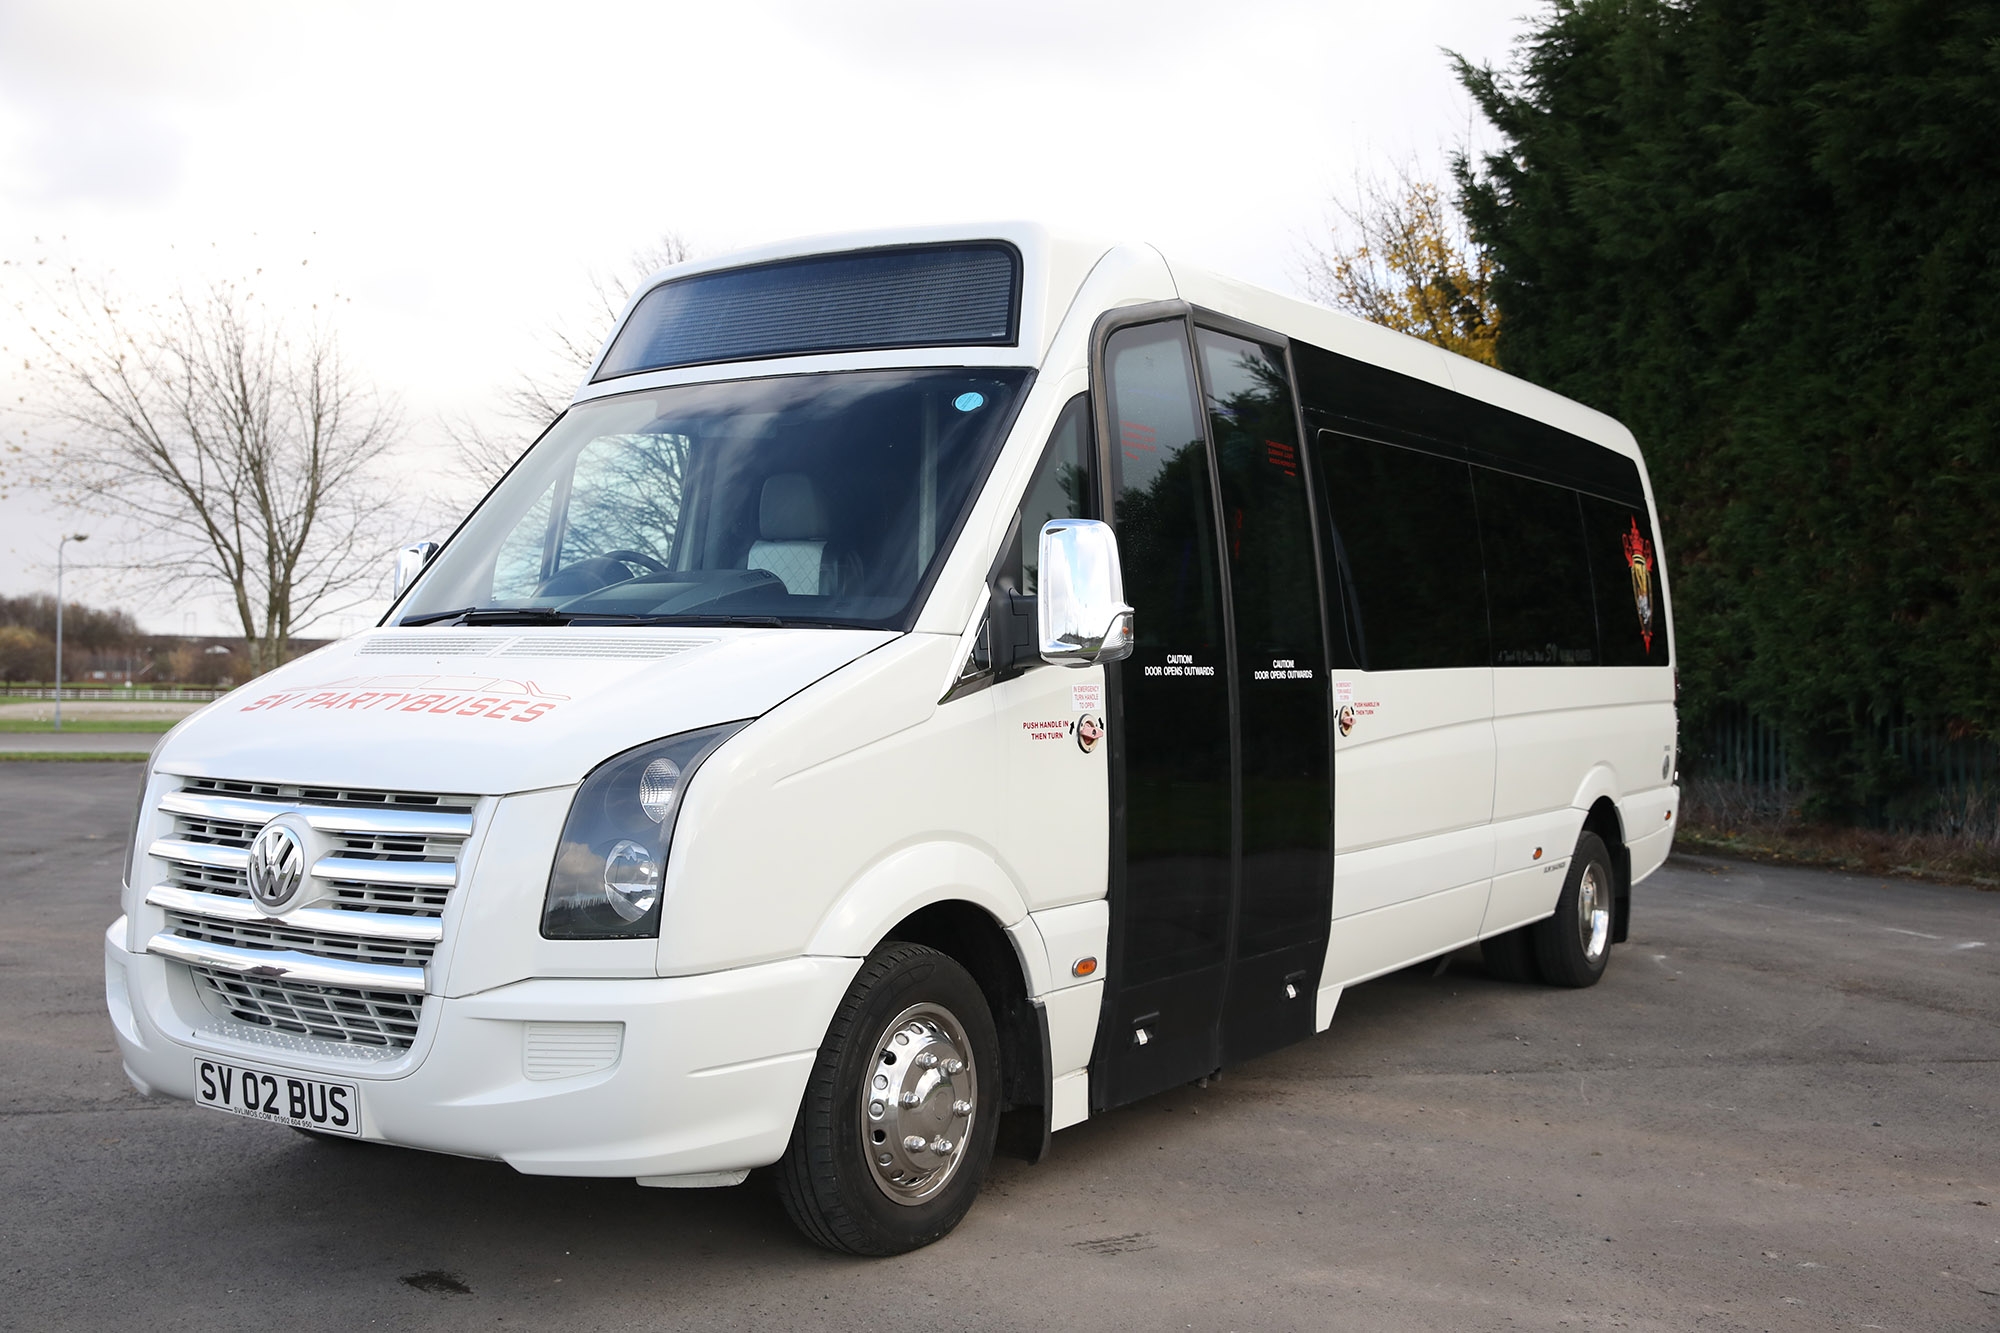 What to Expect When Hiring a Party Bus in the UK